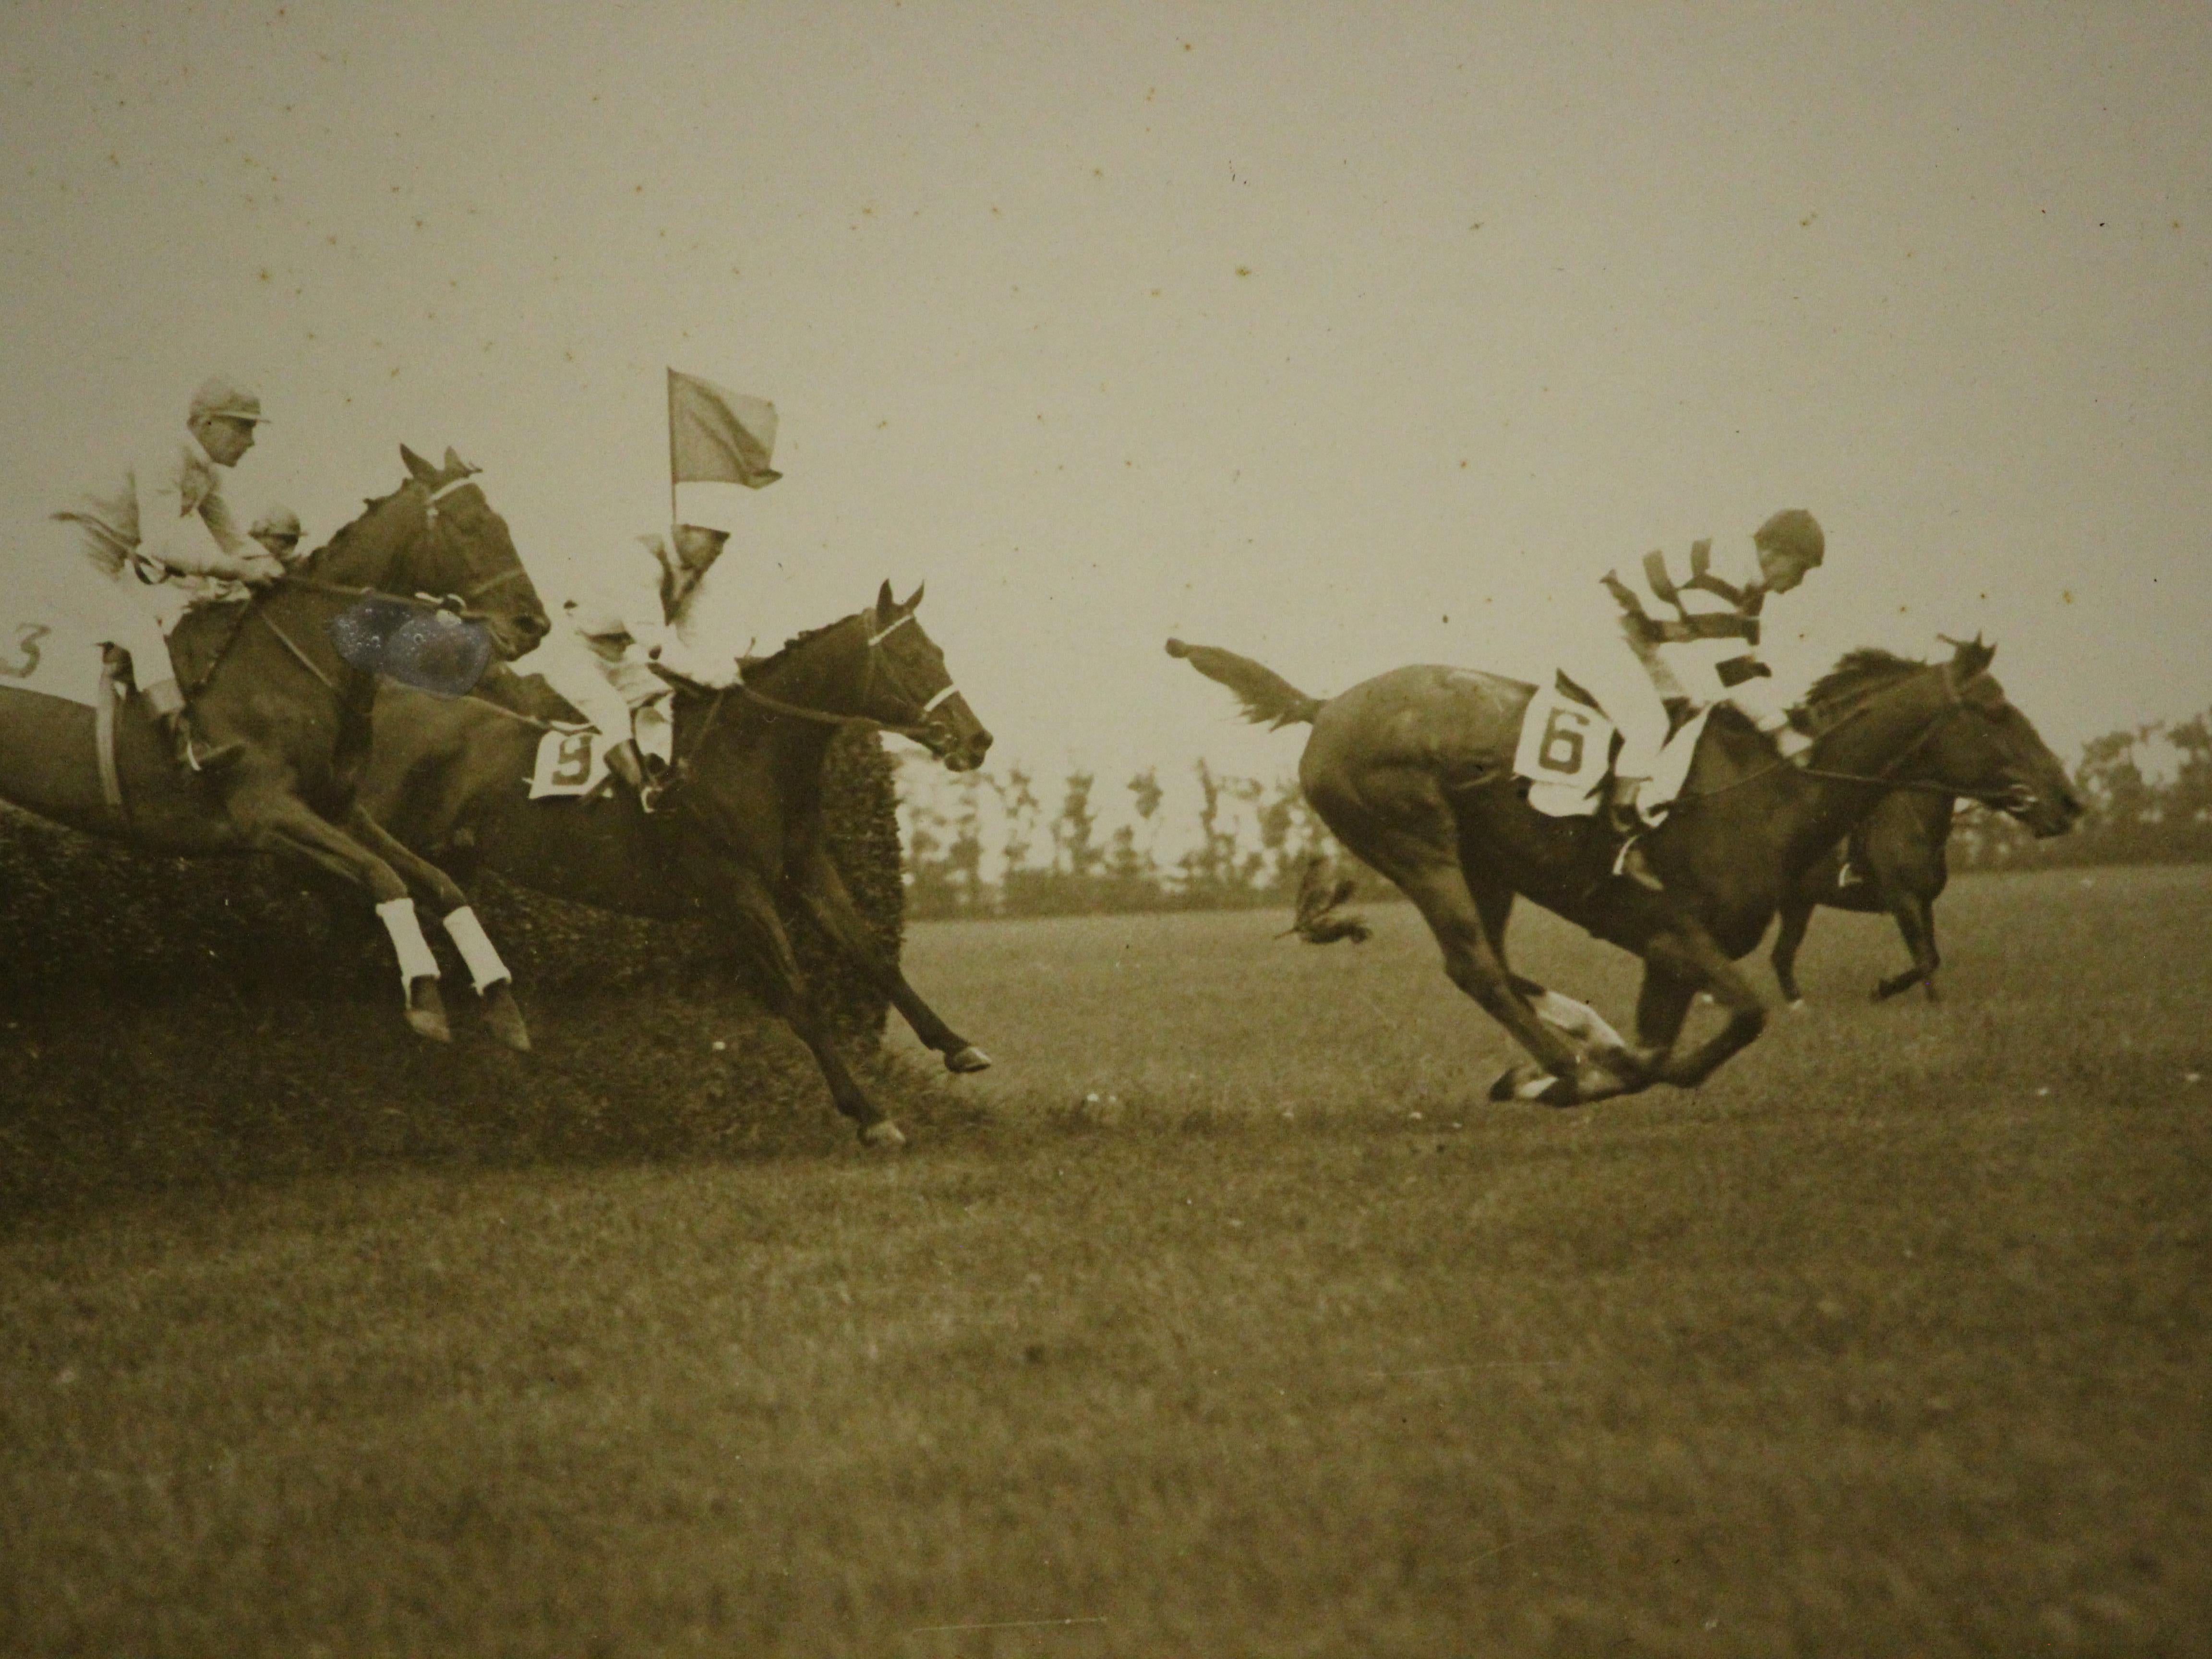 Classic/ rare original B&W photo by C.C. Cook N.Y. depicting the running of the Potomac Steeplechase at Belmont Park May 30, 1930

Photo Sz: 7 3/4